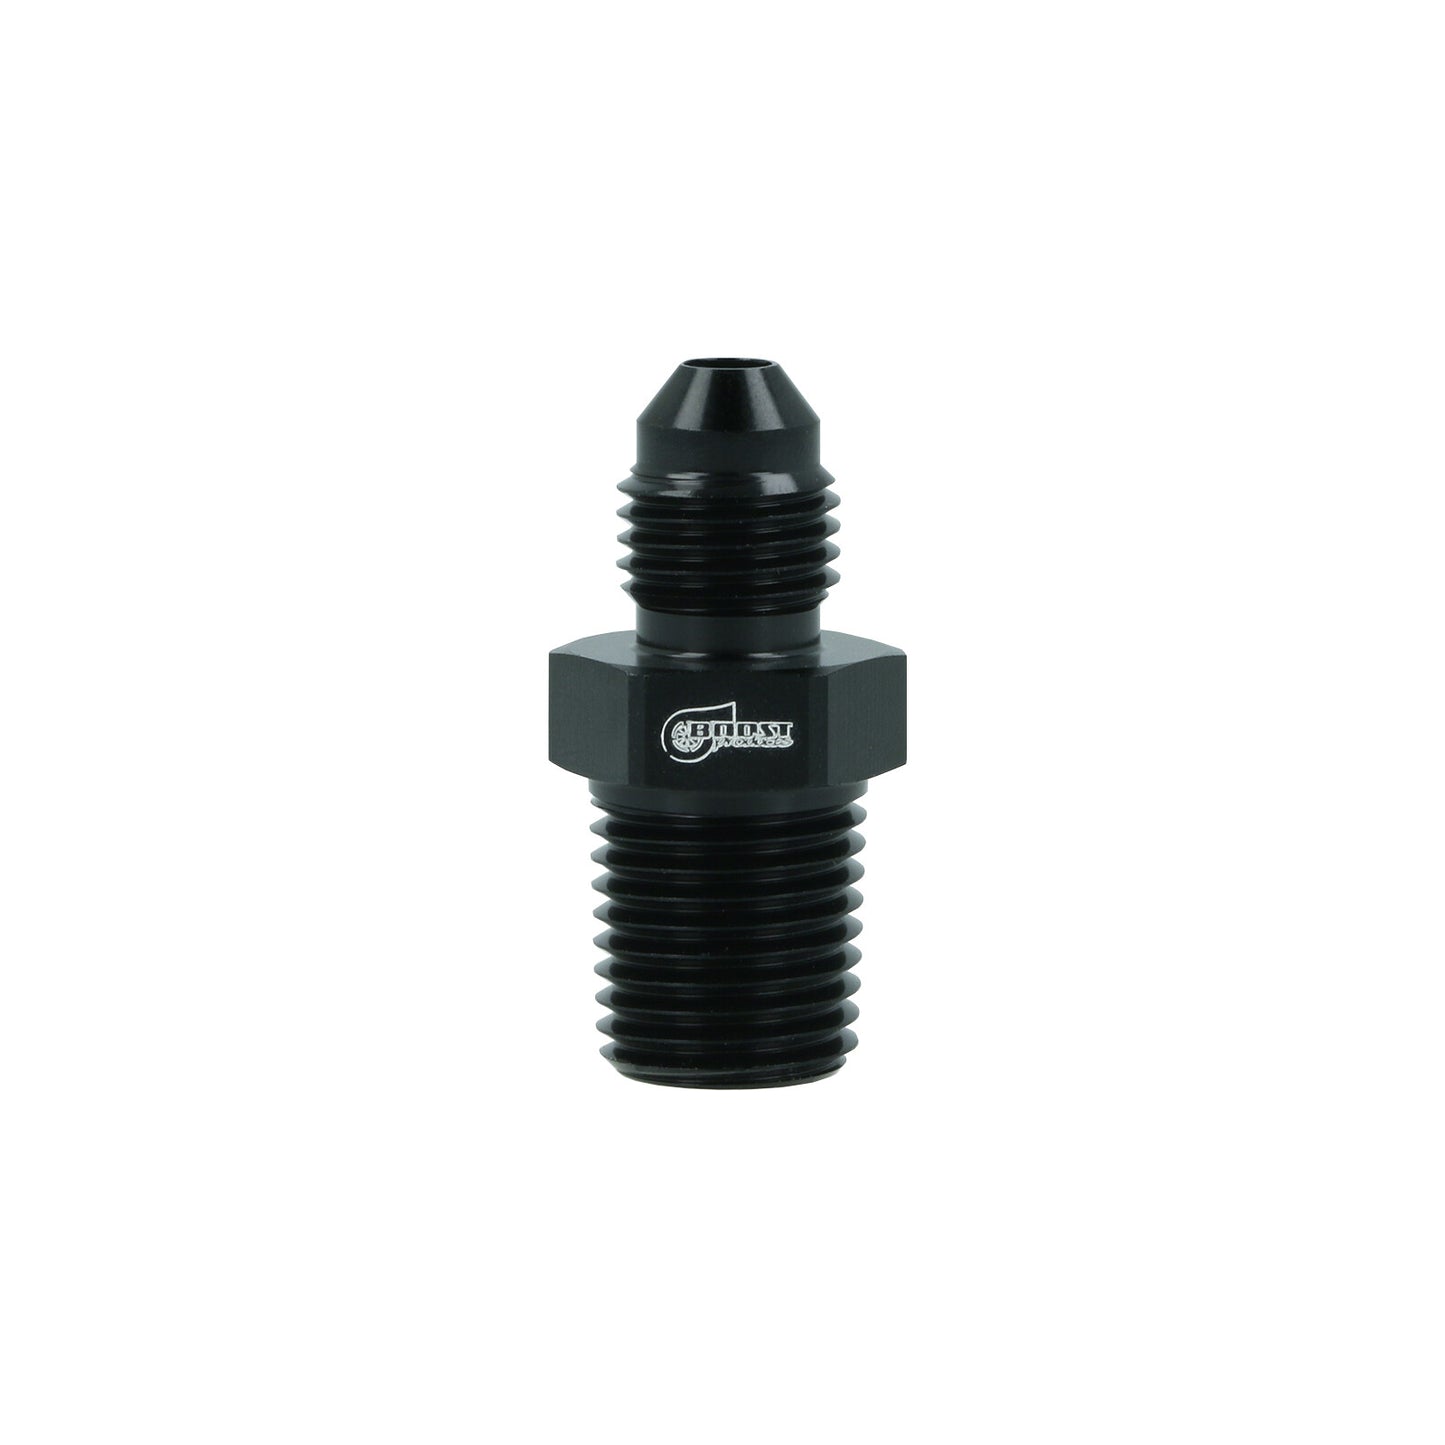 Adapter Dash 4 male to NPT 1/4" male | BOOST products